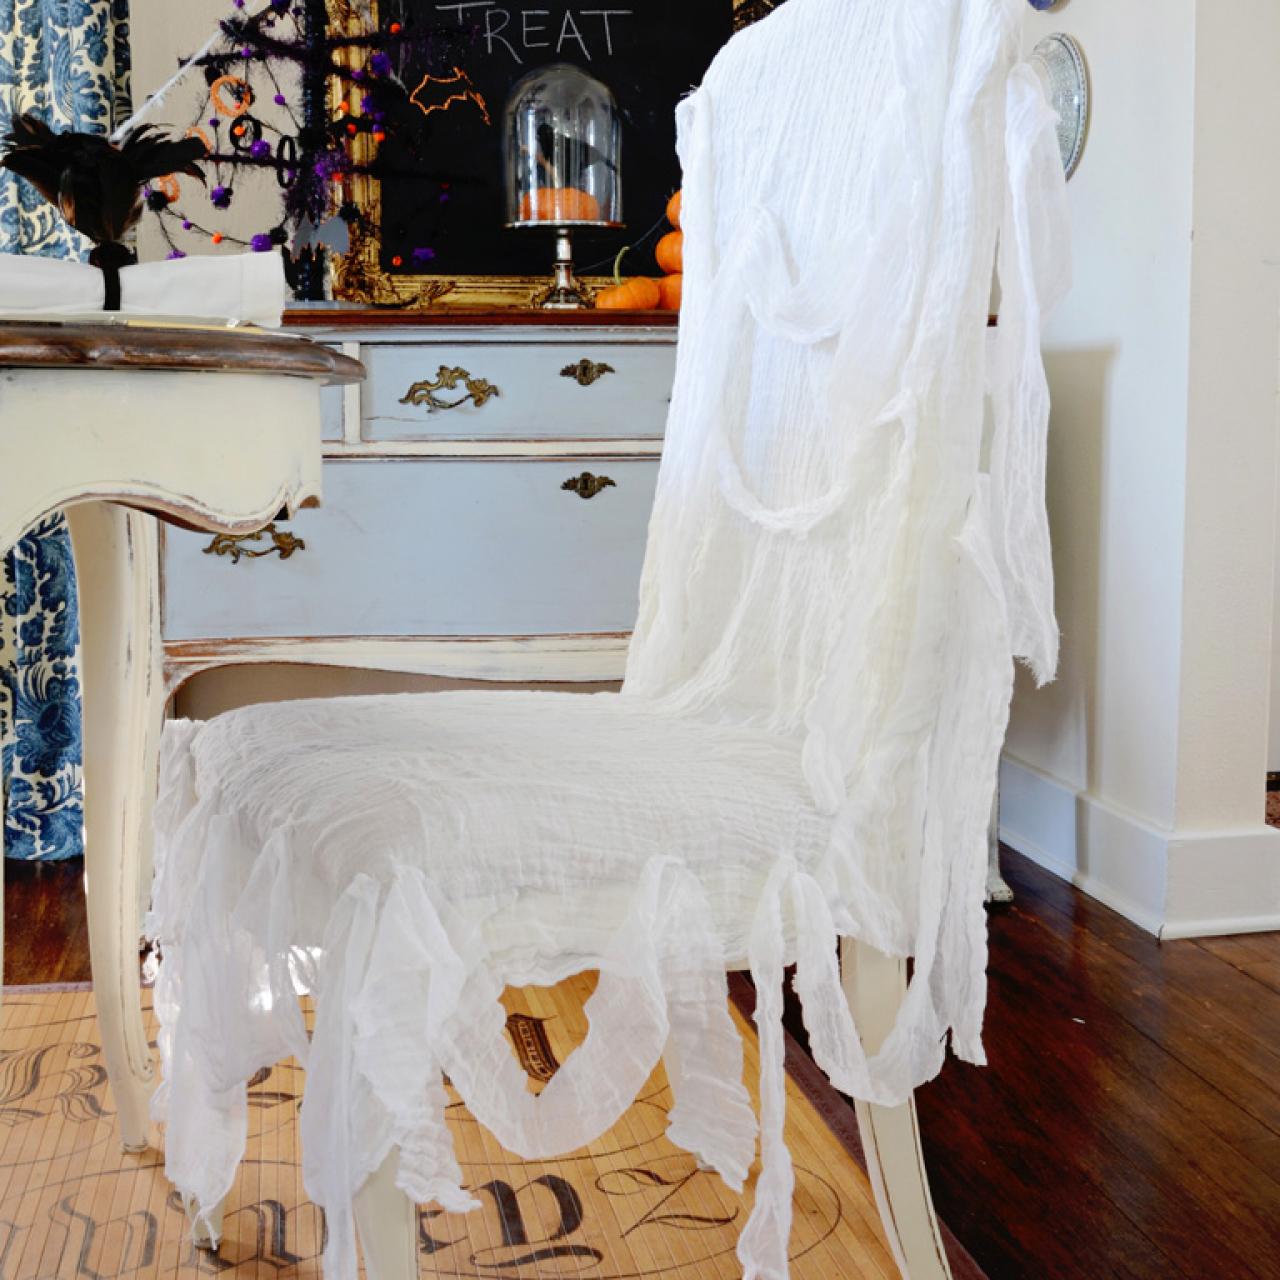 How to Sew Chair Covers